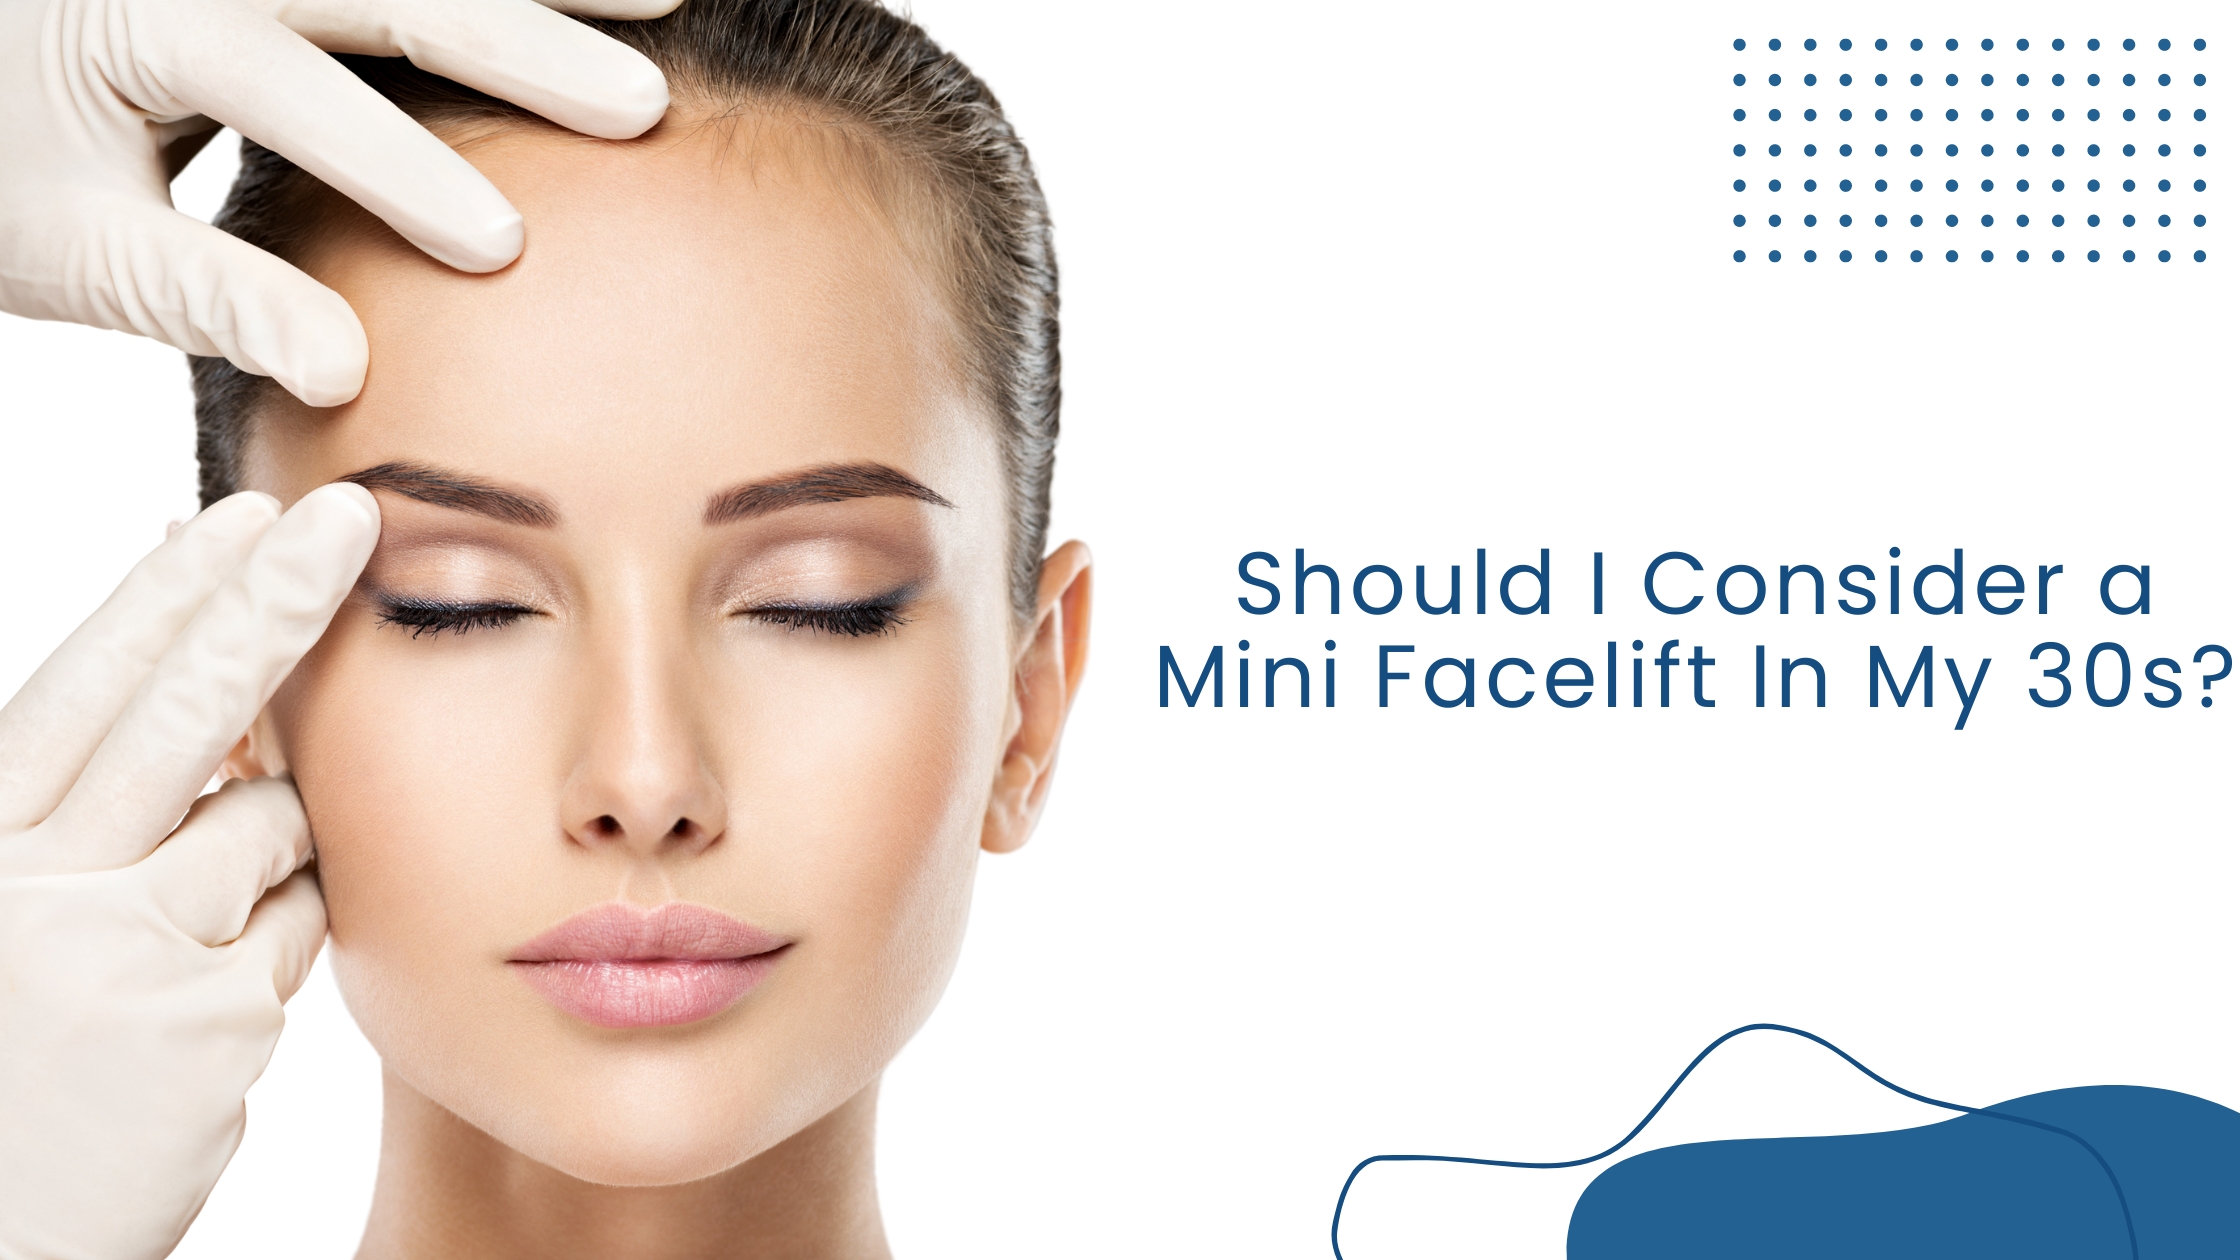 Should I Consider a Mini Facelift In My 30s?